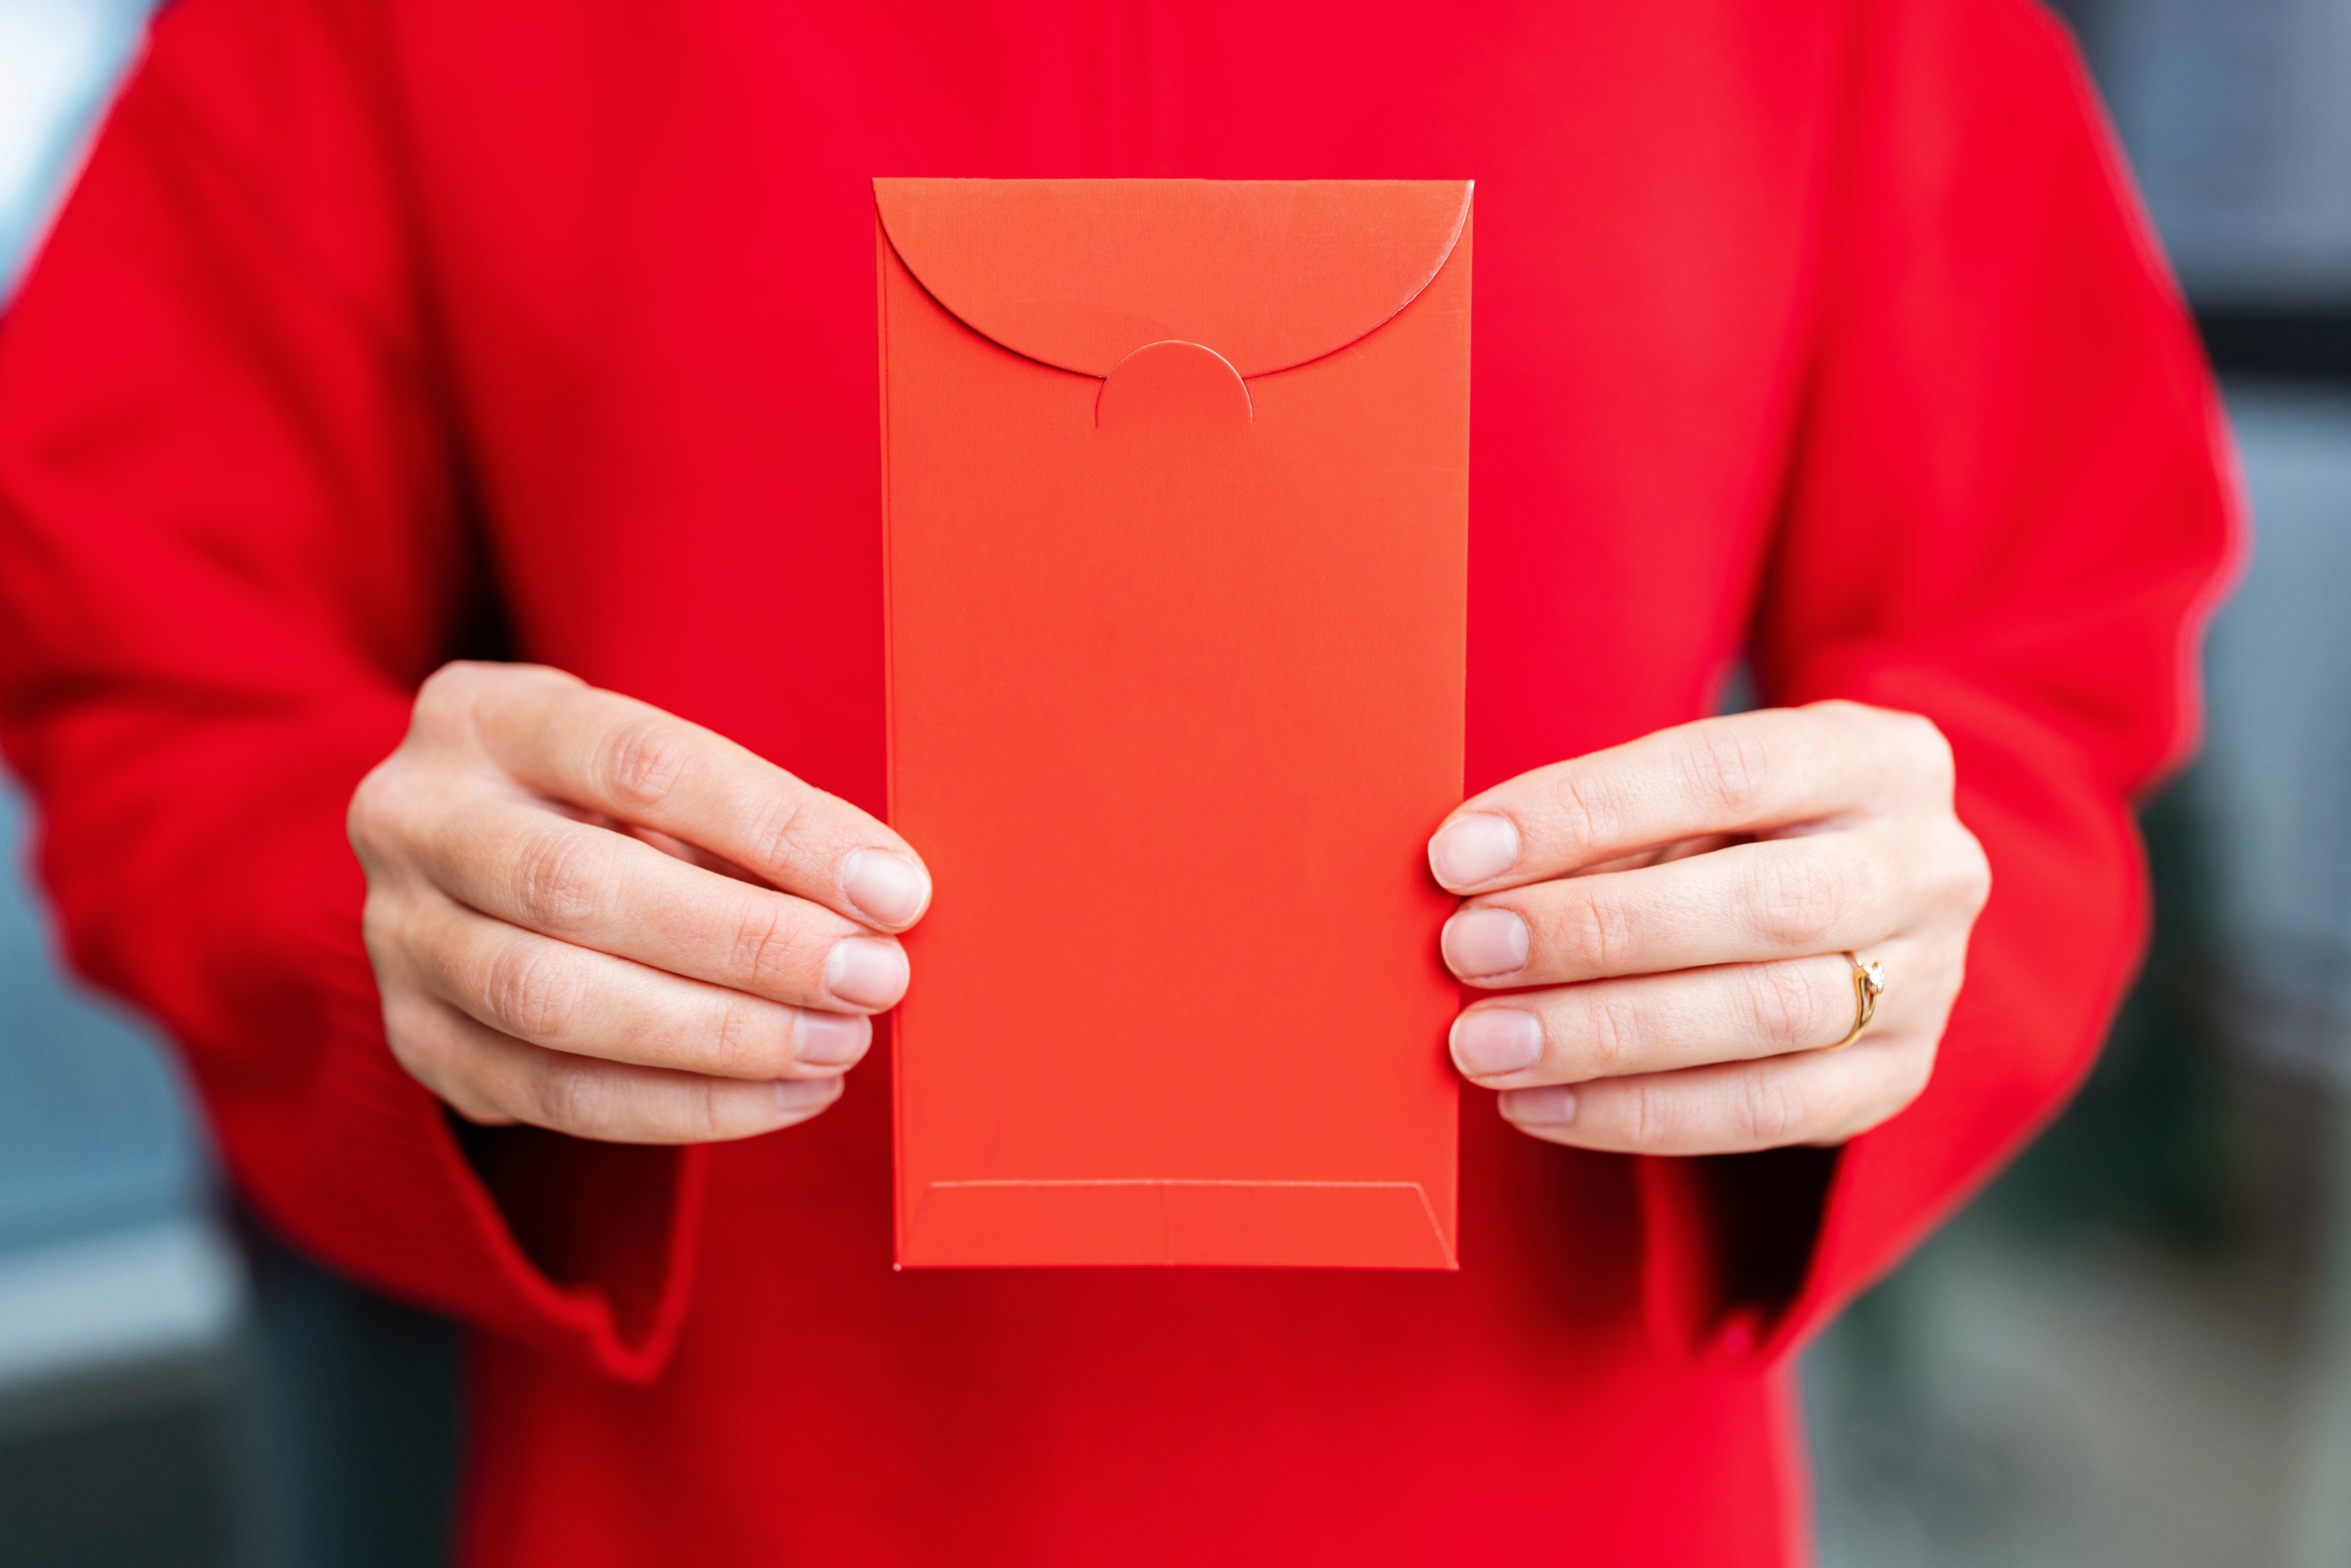 Lai see red envelopes are a staple of Lunar New Year celebrations. We reveal on which days to open these money-filled packets to avoid bad luck and set yourself up for an auspicious Year of the Dragon. Photo: Shutterstock